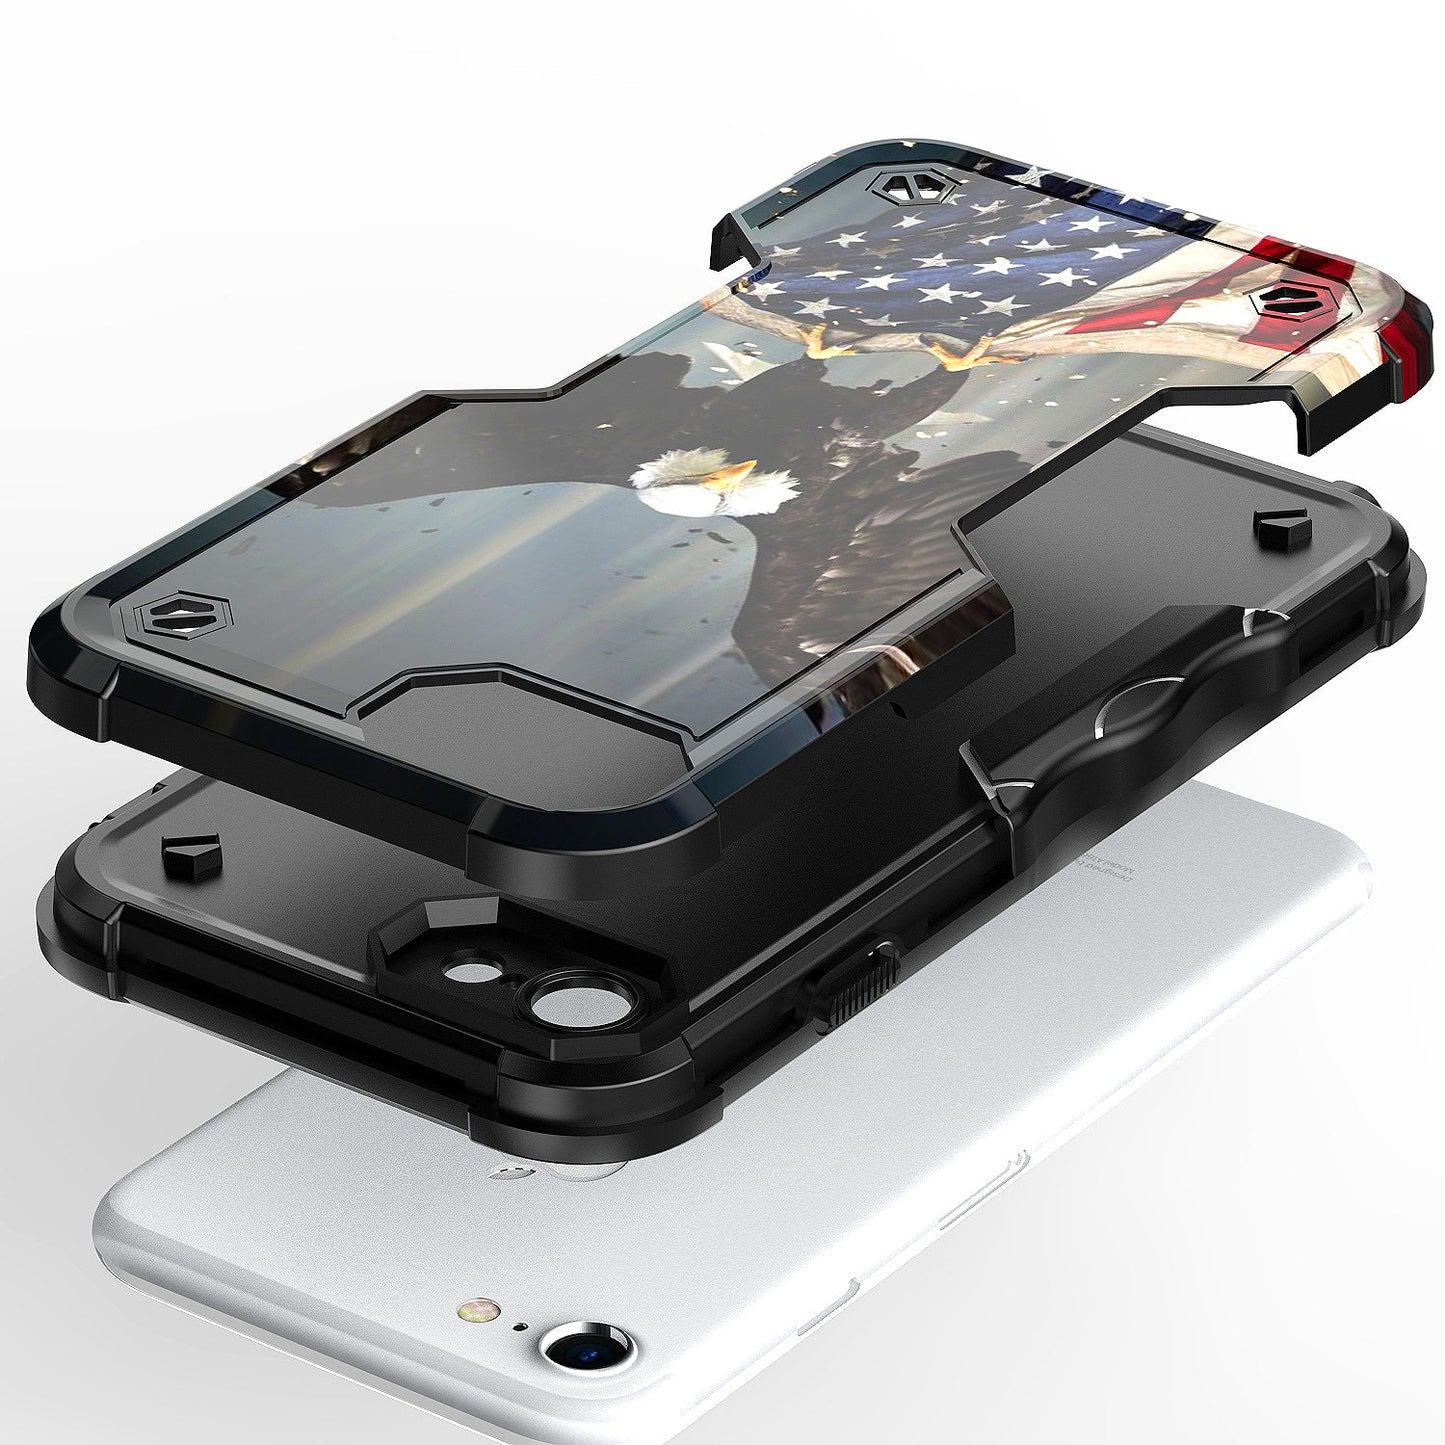 Case For Apple iPhone 7 - Hybrid Grip Design Shockproof Phone Cover - American Bald Eagle Flying with Flag